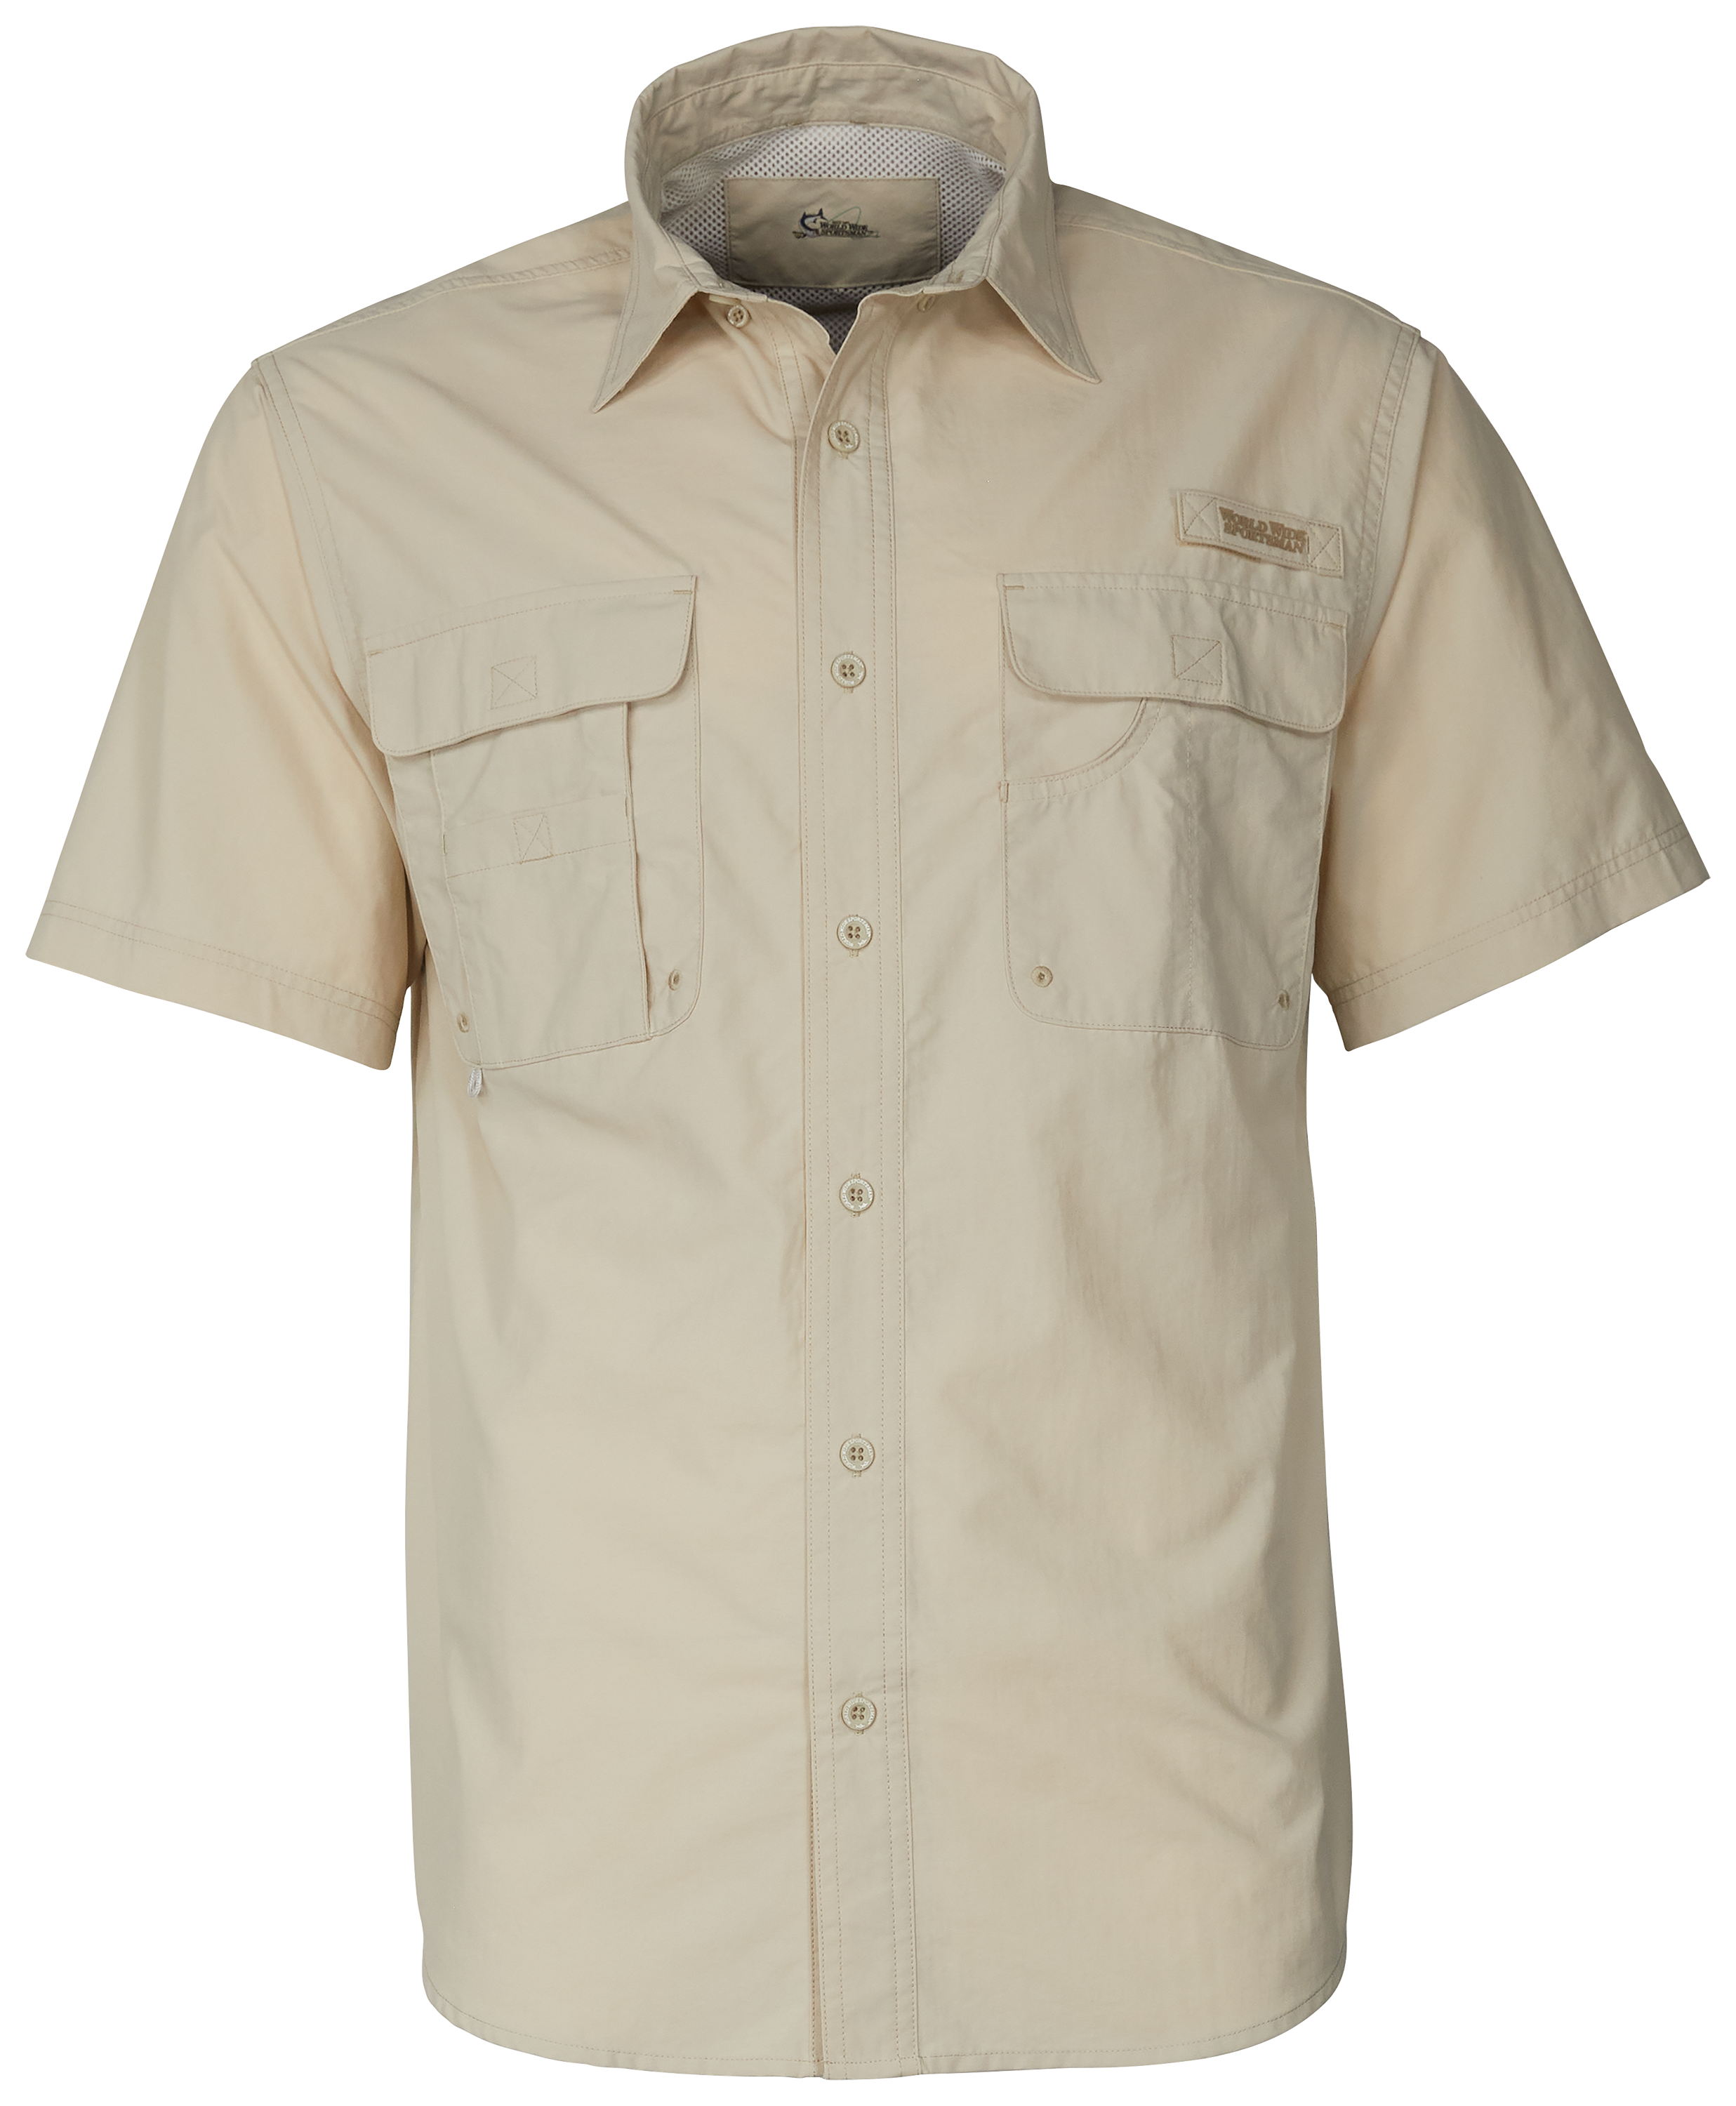 World Wide Sportsman Recycled-Nylon Angler 2.0 Short-Sleeve Button-Down Shirt for Men - Peyote - S